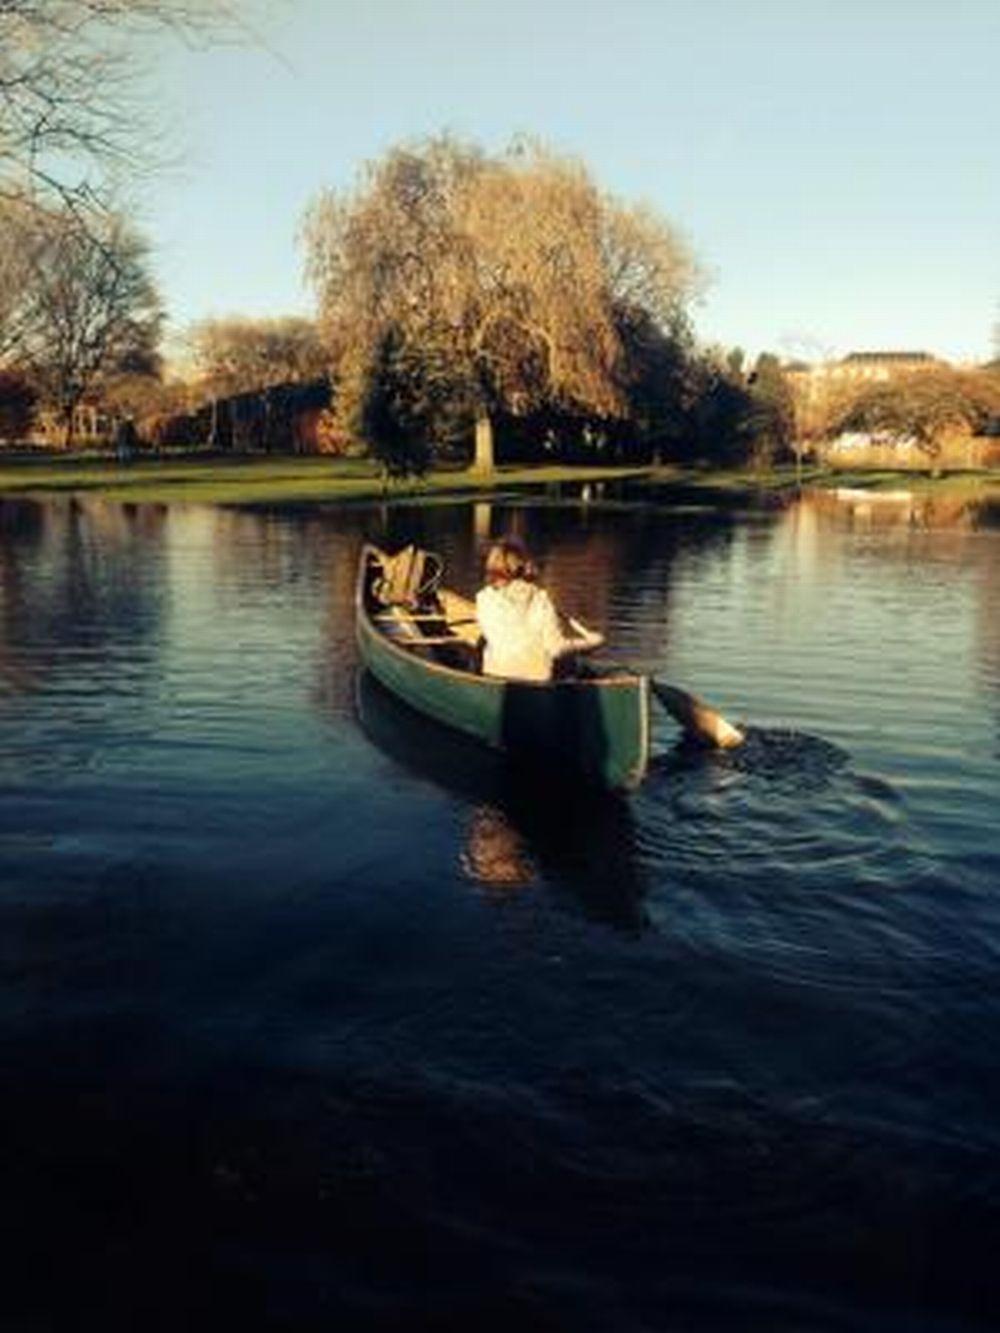 Maddie Quigley took her canoe for a spin around Queen Elizabeth Gardens' flood water. Picture sent by Martin Quigley.